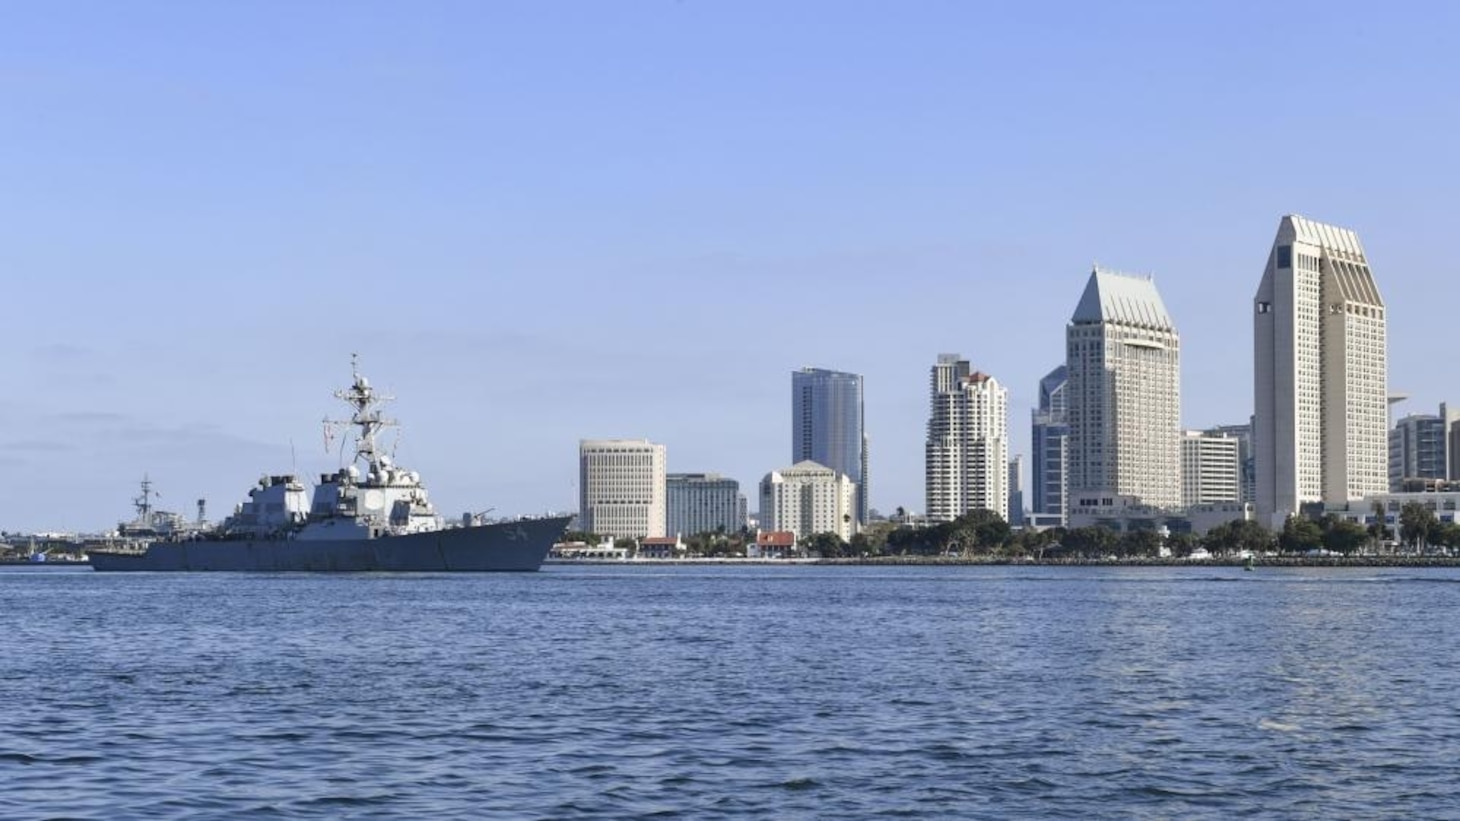 SAN DIEGO (September 16, 2021) - The Arleigh Burke-class guided-missile destroyer USS Curtis Wilbur (DDG 54) arrives in San Diego to conduct a homeport shift from Yokosuka, Japan. Curtis Wilbur was commissioned in 1994 and has been in Yokosuka, Japan since September 1995, making her the longest forward-deployed naval asset in recent history. (U.S. Navy photo by Mass Communication Specialist 1st Class Julio Rivera)